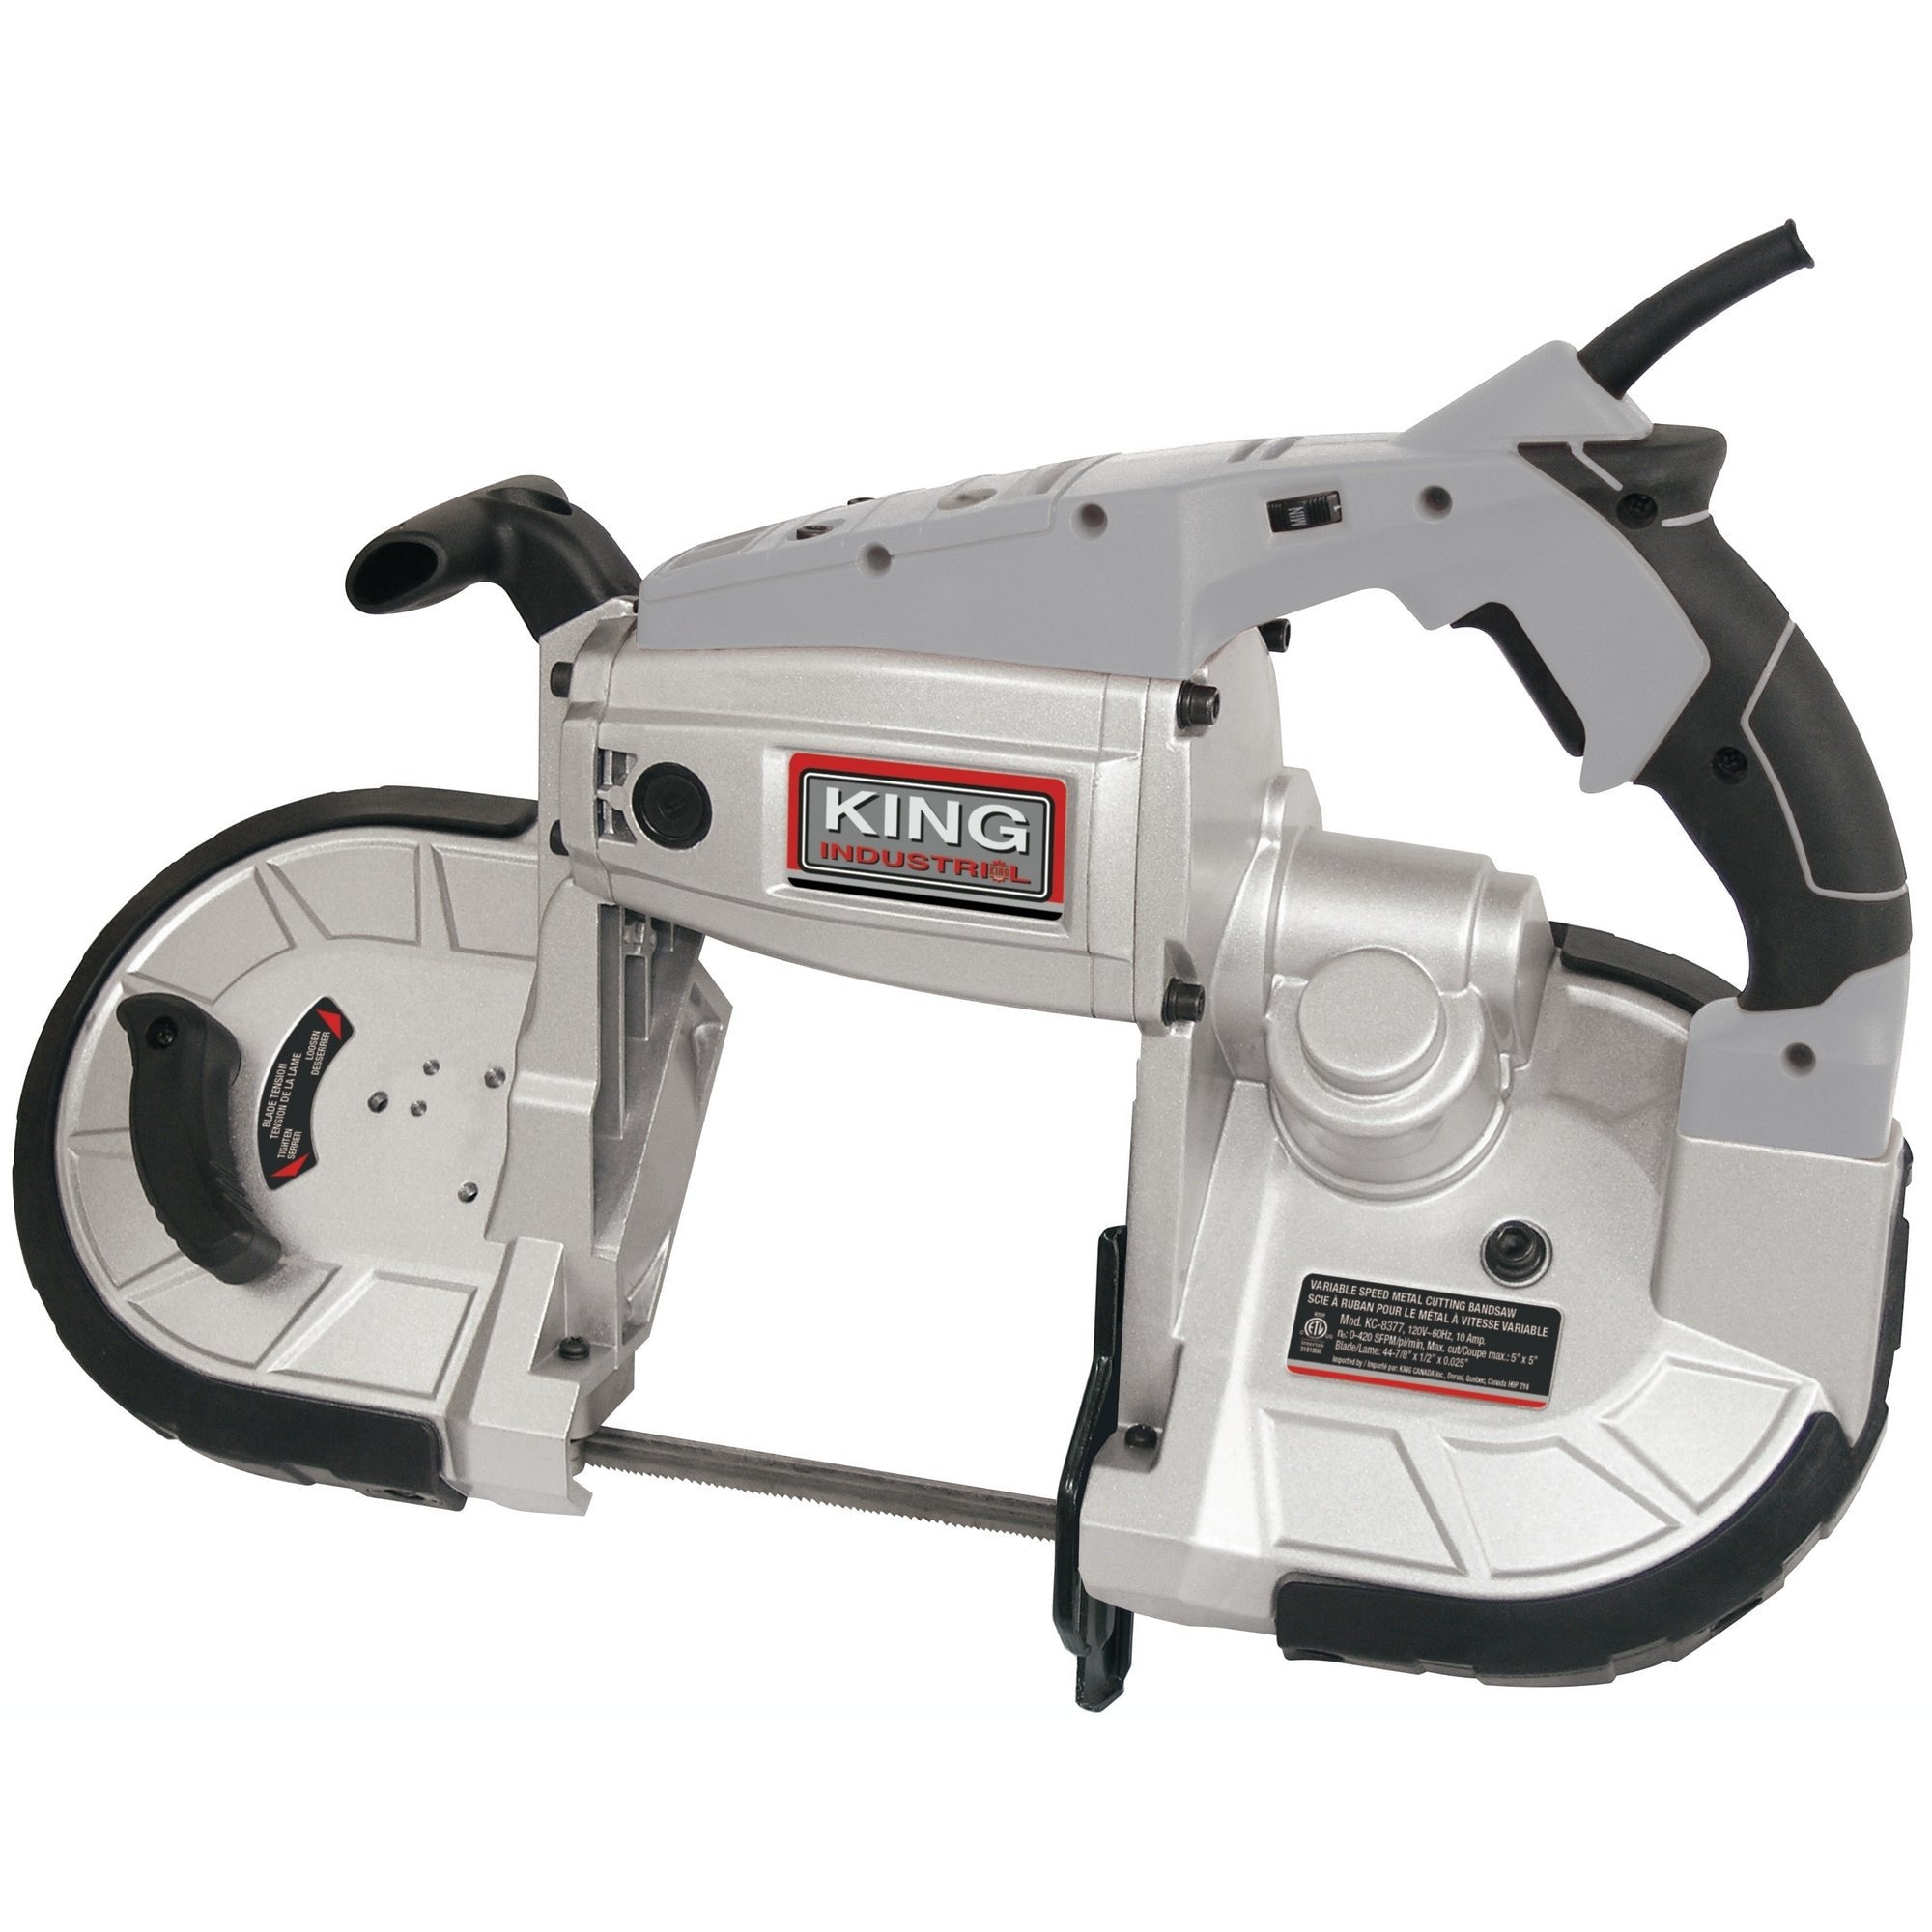 King Canada KC-8377  -  PORTABLE VARIABLE SPEED METAL CUTTING BANDSAW